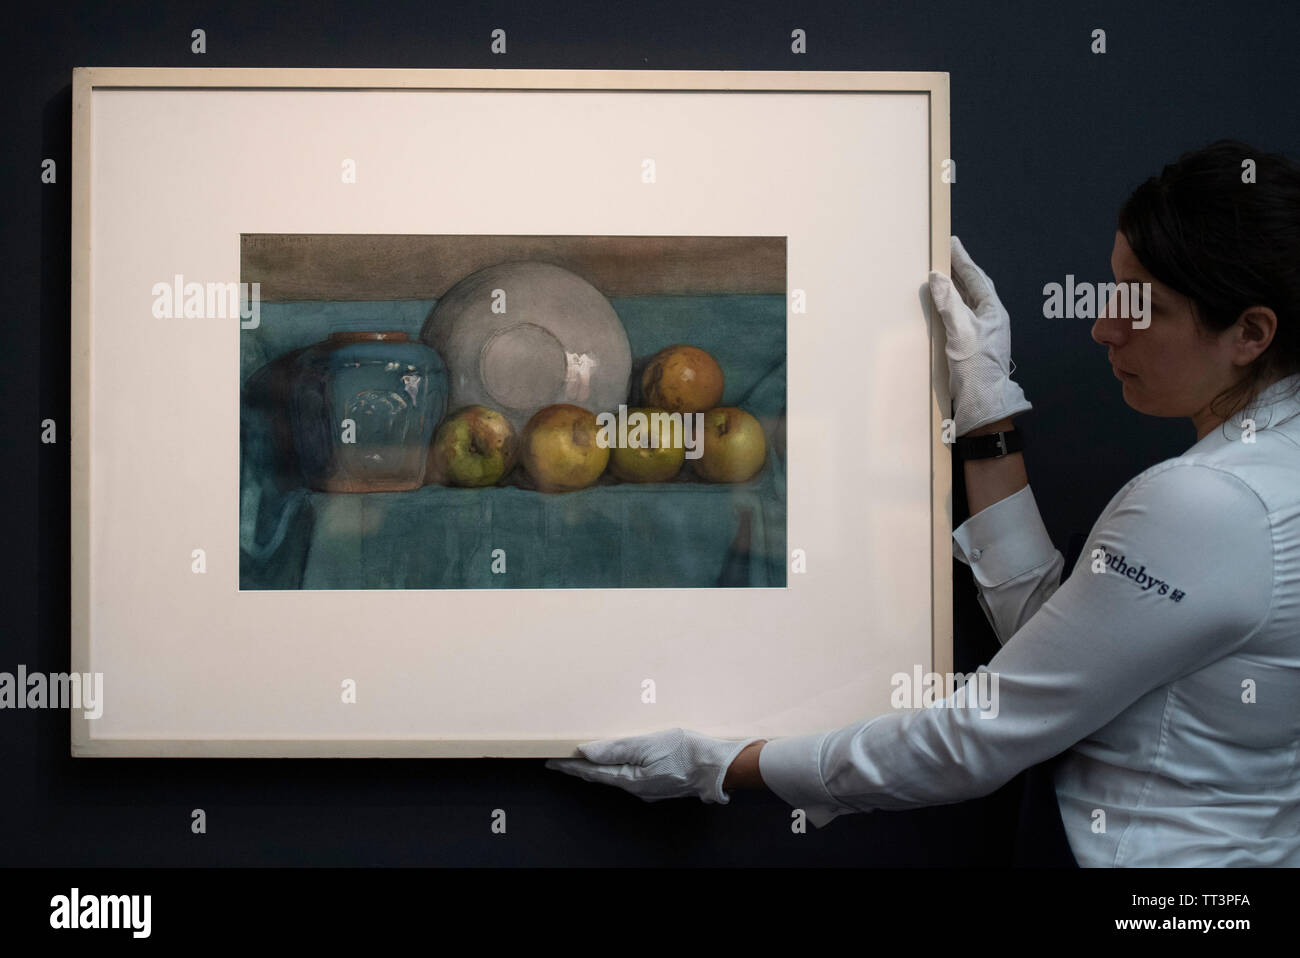 Sotheby’s, London, UK. 14th June 2019. Major Impressionism to Modern British works, some unseen for decades, are previewed for the Sotheby’s summer sale. Image: A Sothebys art handler with Piet Mondrian, Appels, Gemberpot en Bord op een Richel (Apples, Ginger Pot and Plate on a Ledge), estimate £70,000-90,000. Credit: Malcolm Park/Alamy Live News. Stock Photo